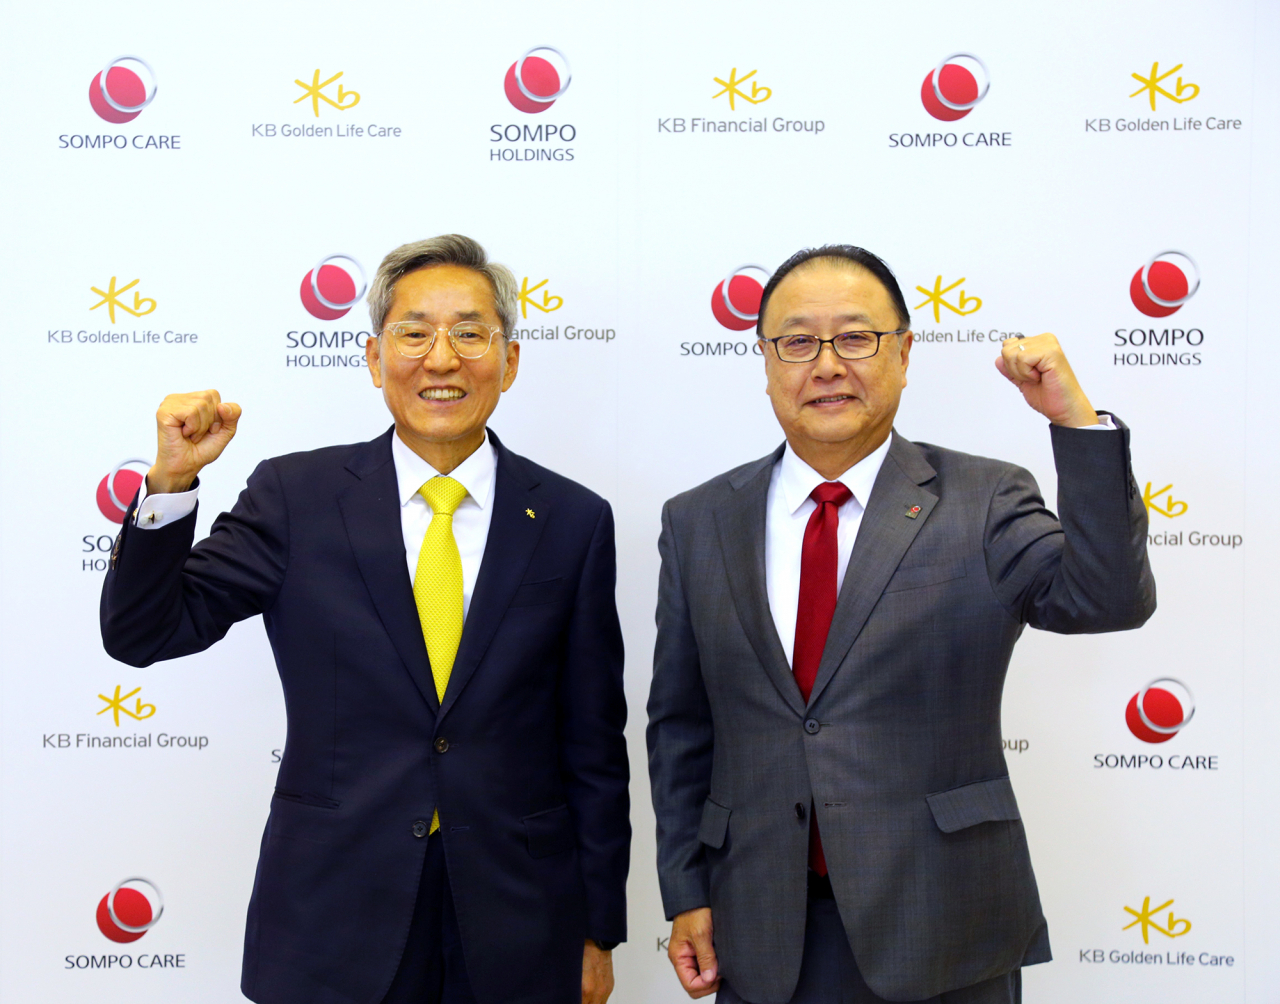 KB Financial Group Chairman Yoon Jong-kyoo (left) and Sompo Holdings Chairman Sakurada Kengo pose after a memorandum of understanding signing event at the Sompo headquarters in Tokyo, Thursday. (KB Financial Group)